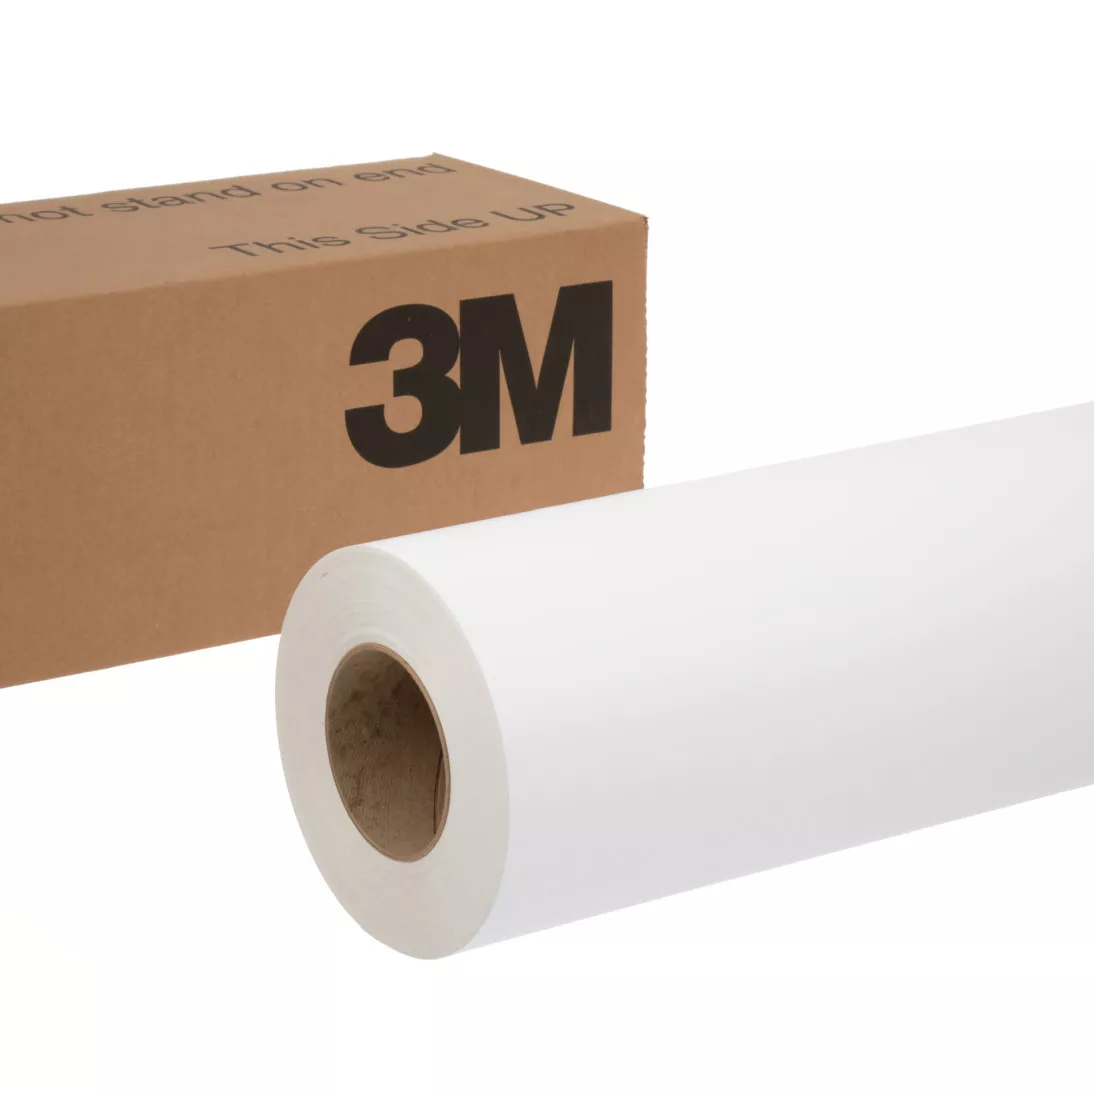 3M™ Scotchlite™ Reflective Graphic Film IJZC-0065, White Laminate To
Sheeting, 48 in x 50 yd, 1 Roll/Case